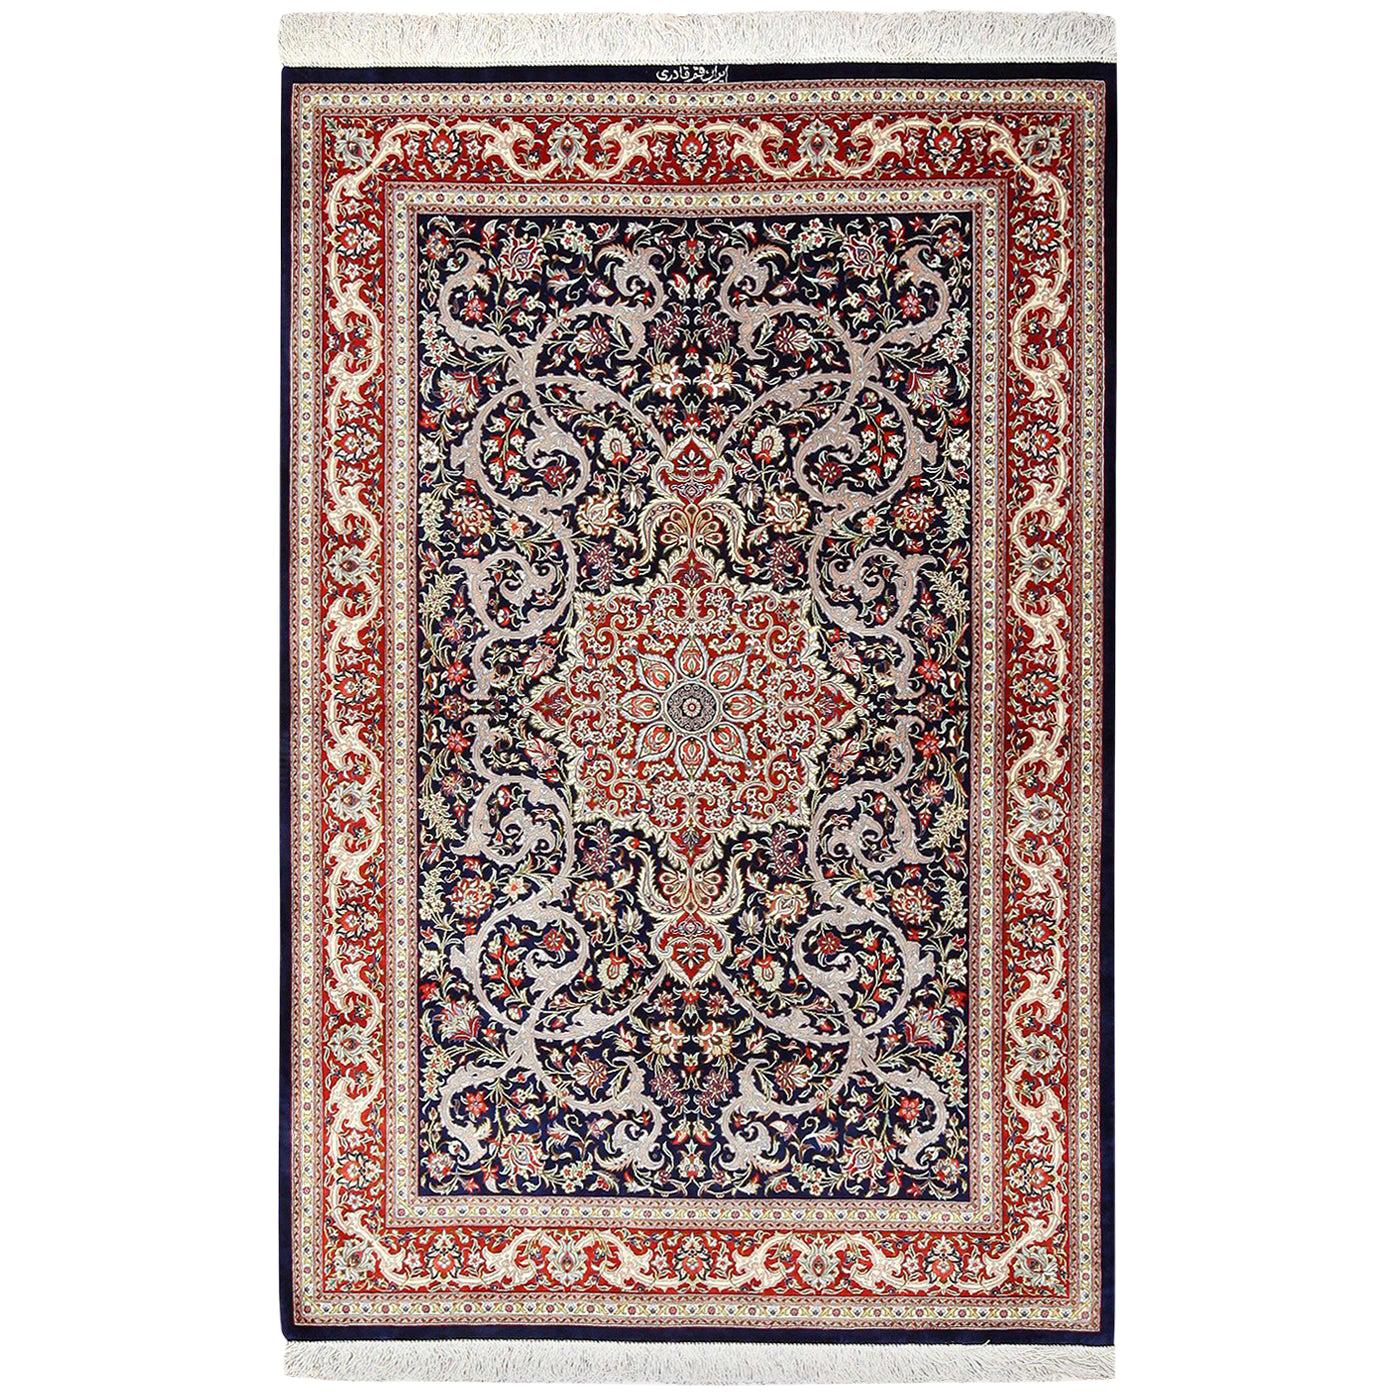 Nazmiyal Collection Silk Persian Qum Rug. Size: 3 ft 4 in x 5 ft 